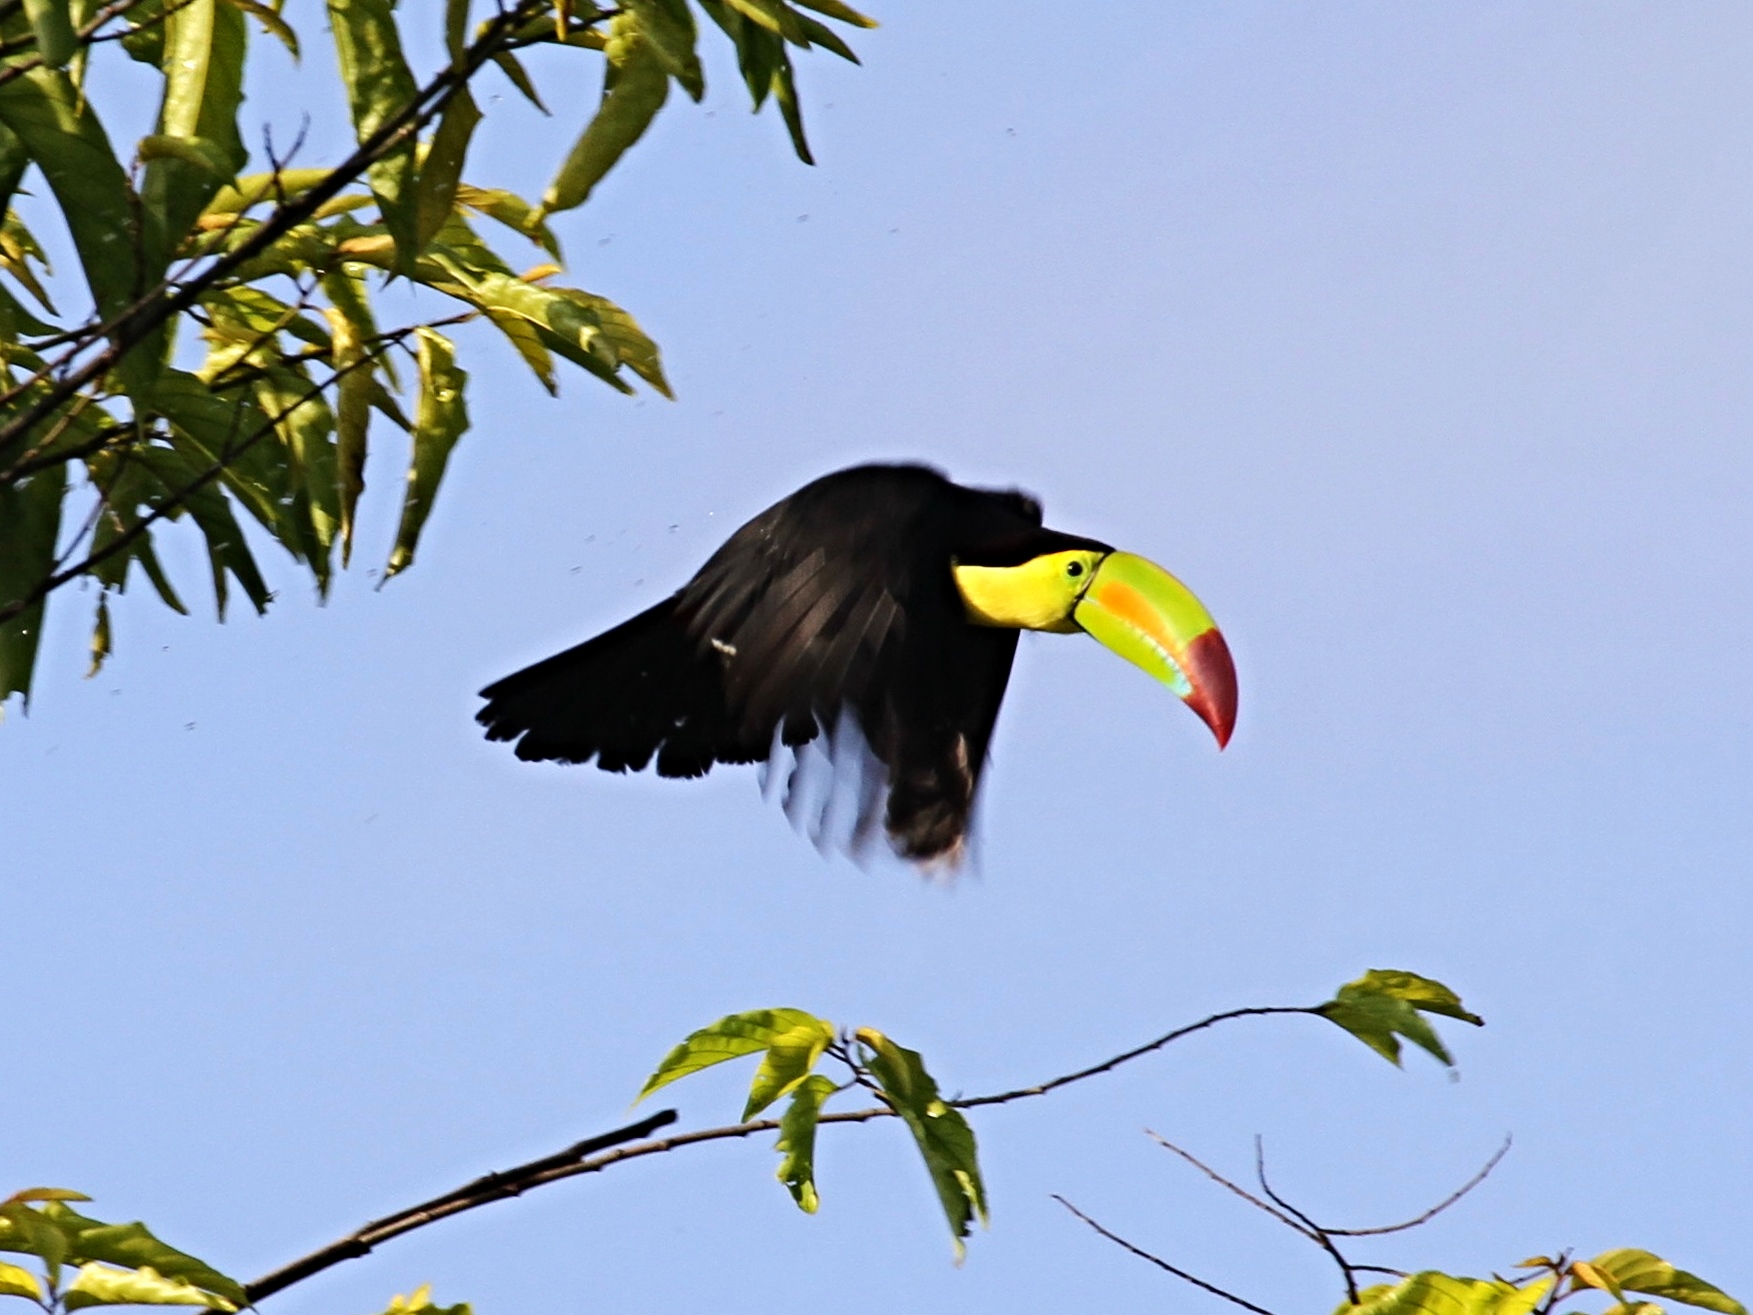 A Keel-Billed Toucan soars through the trees in the morning light